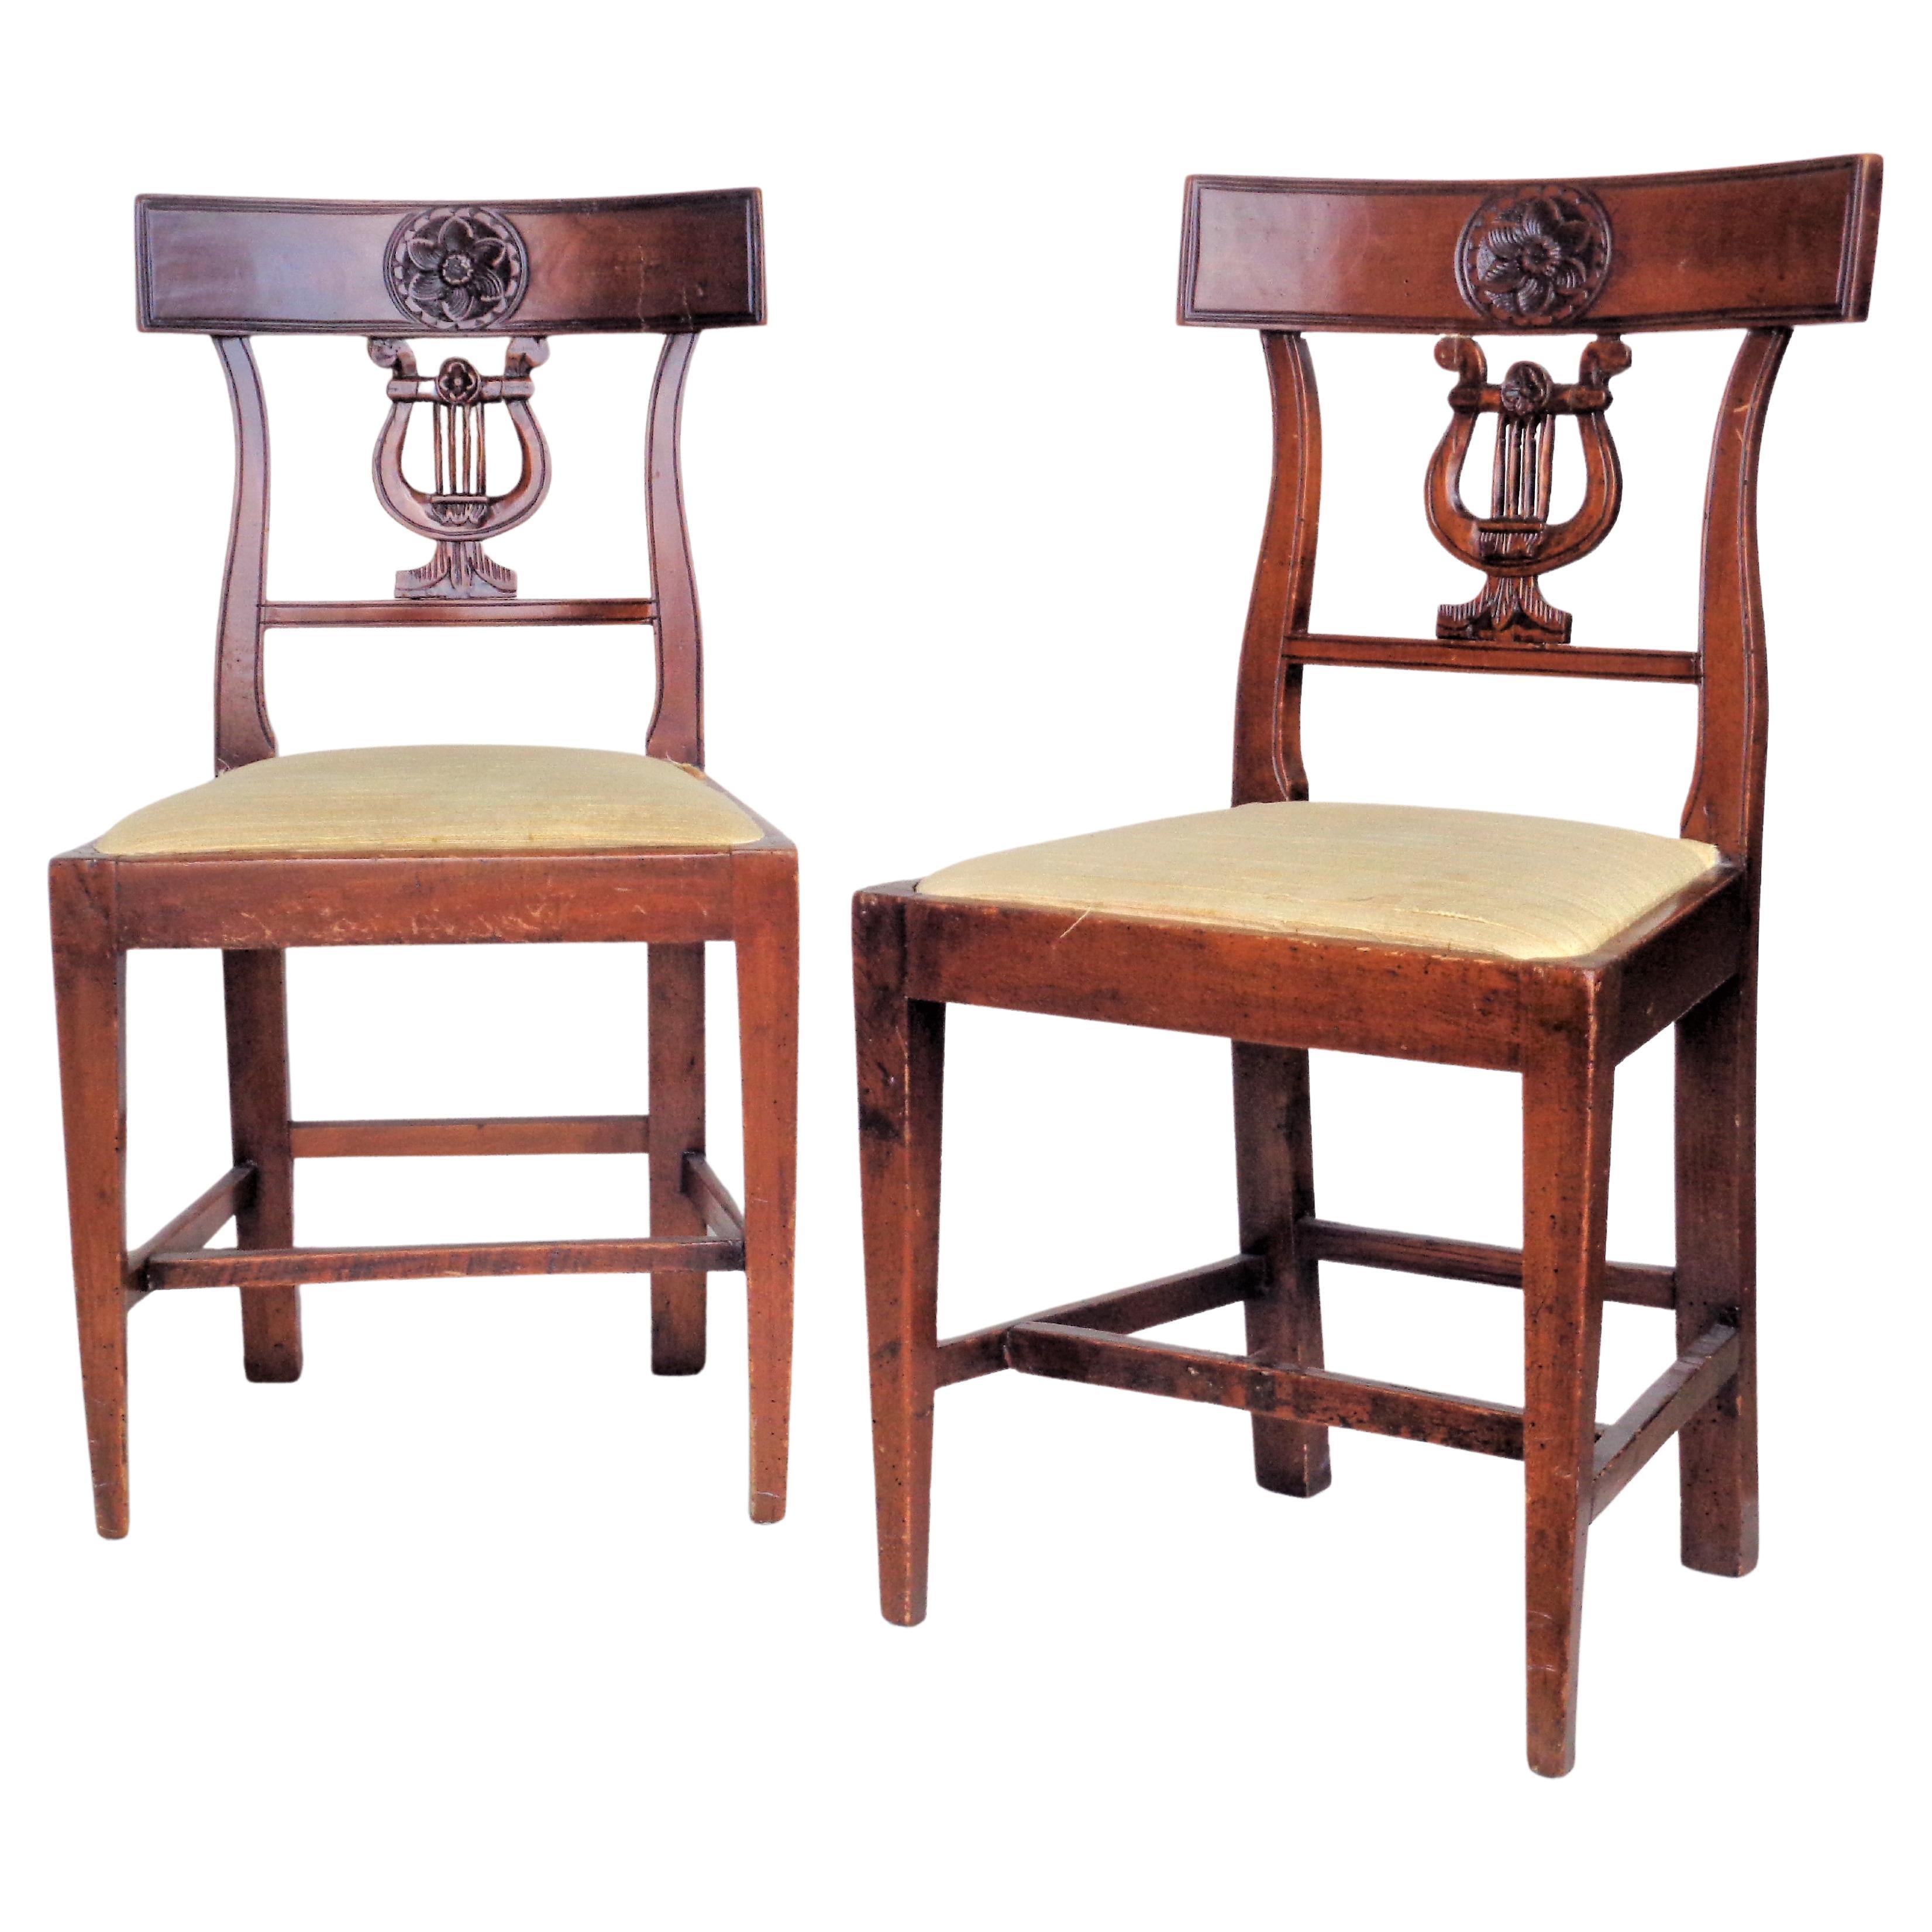  Italian Neoclassical Lyre Back Chairs, Circa 1800 For Sale